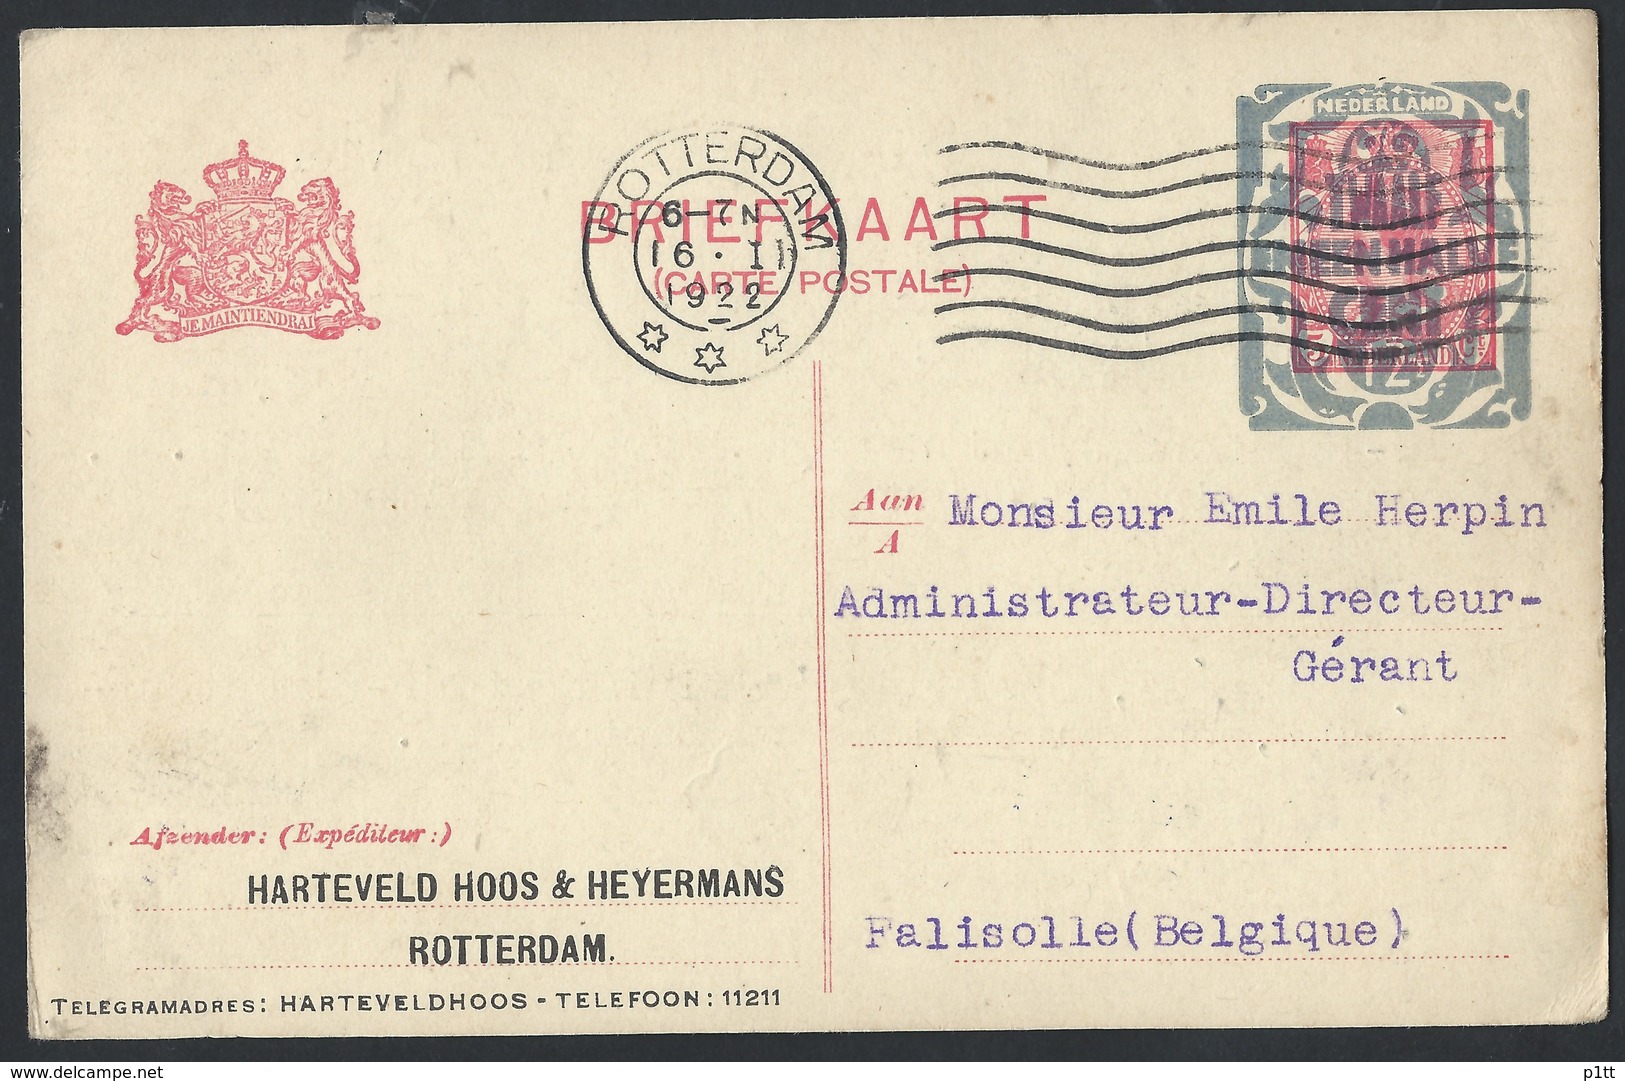 8n.Postcard. The Mail Was Circulated In 1922 Rotterdam (Netherlands) Falisolle (Belgium). Overprints Of Revaluation. - Storia Postale